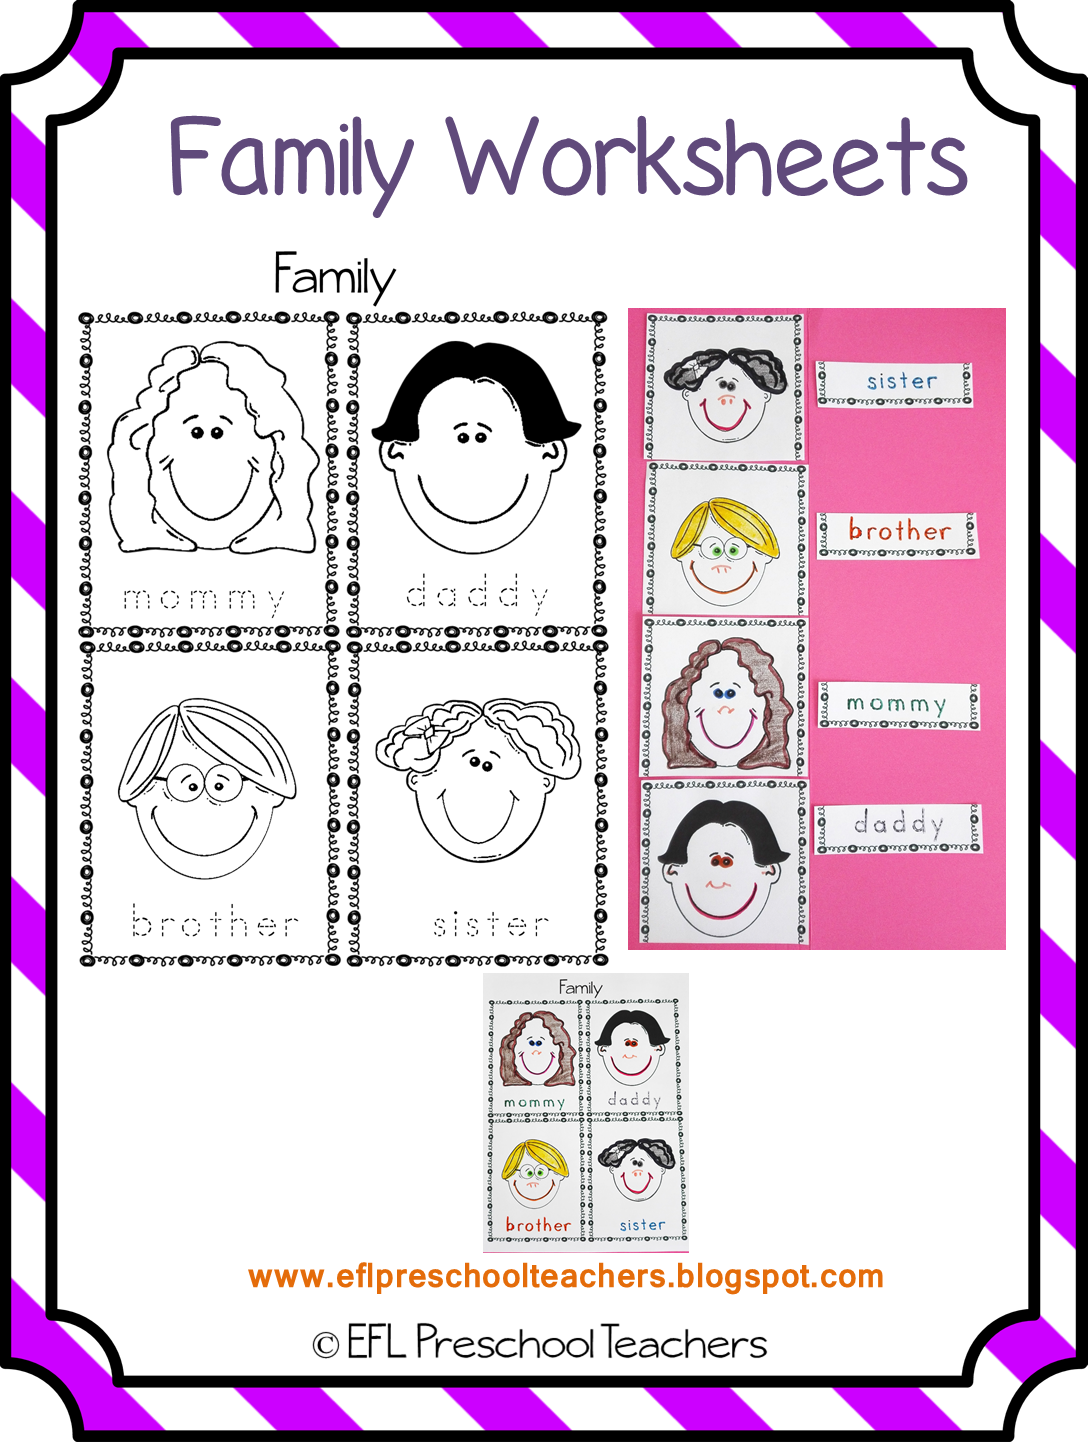 Friends about me word. Worksheets семья. Семья Worksheets for Kids. Worksheets Family 1 класс. Family tasks for Kids.